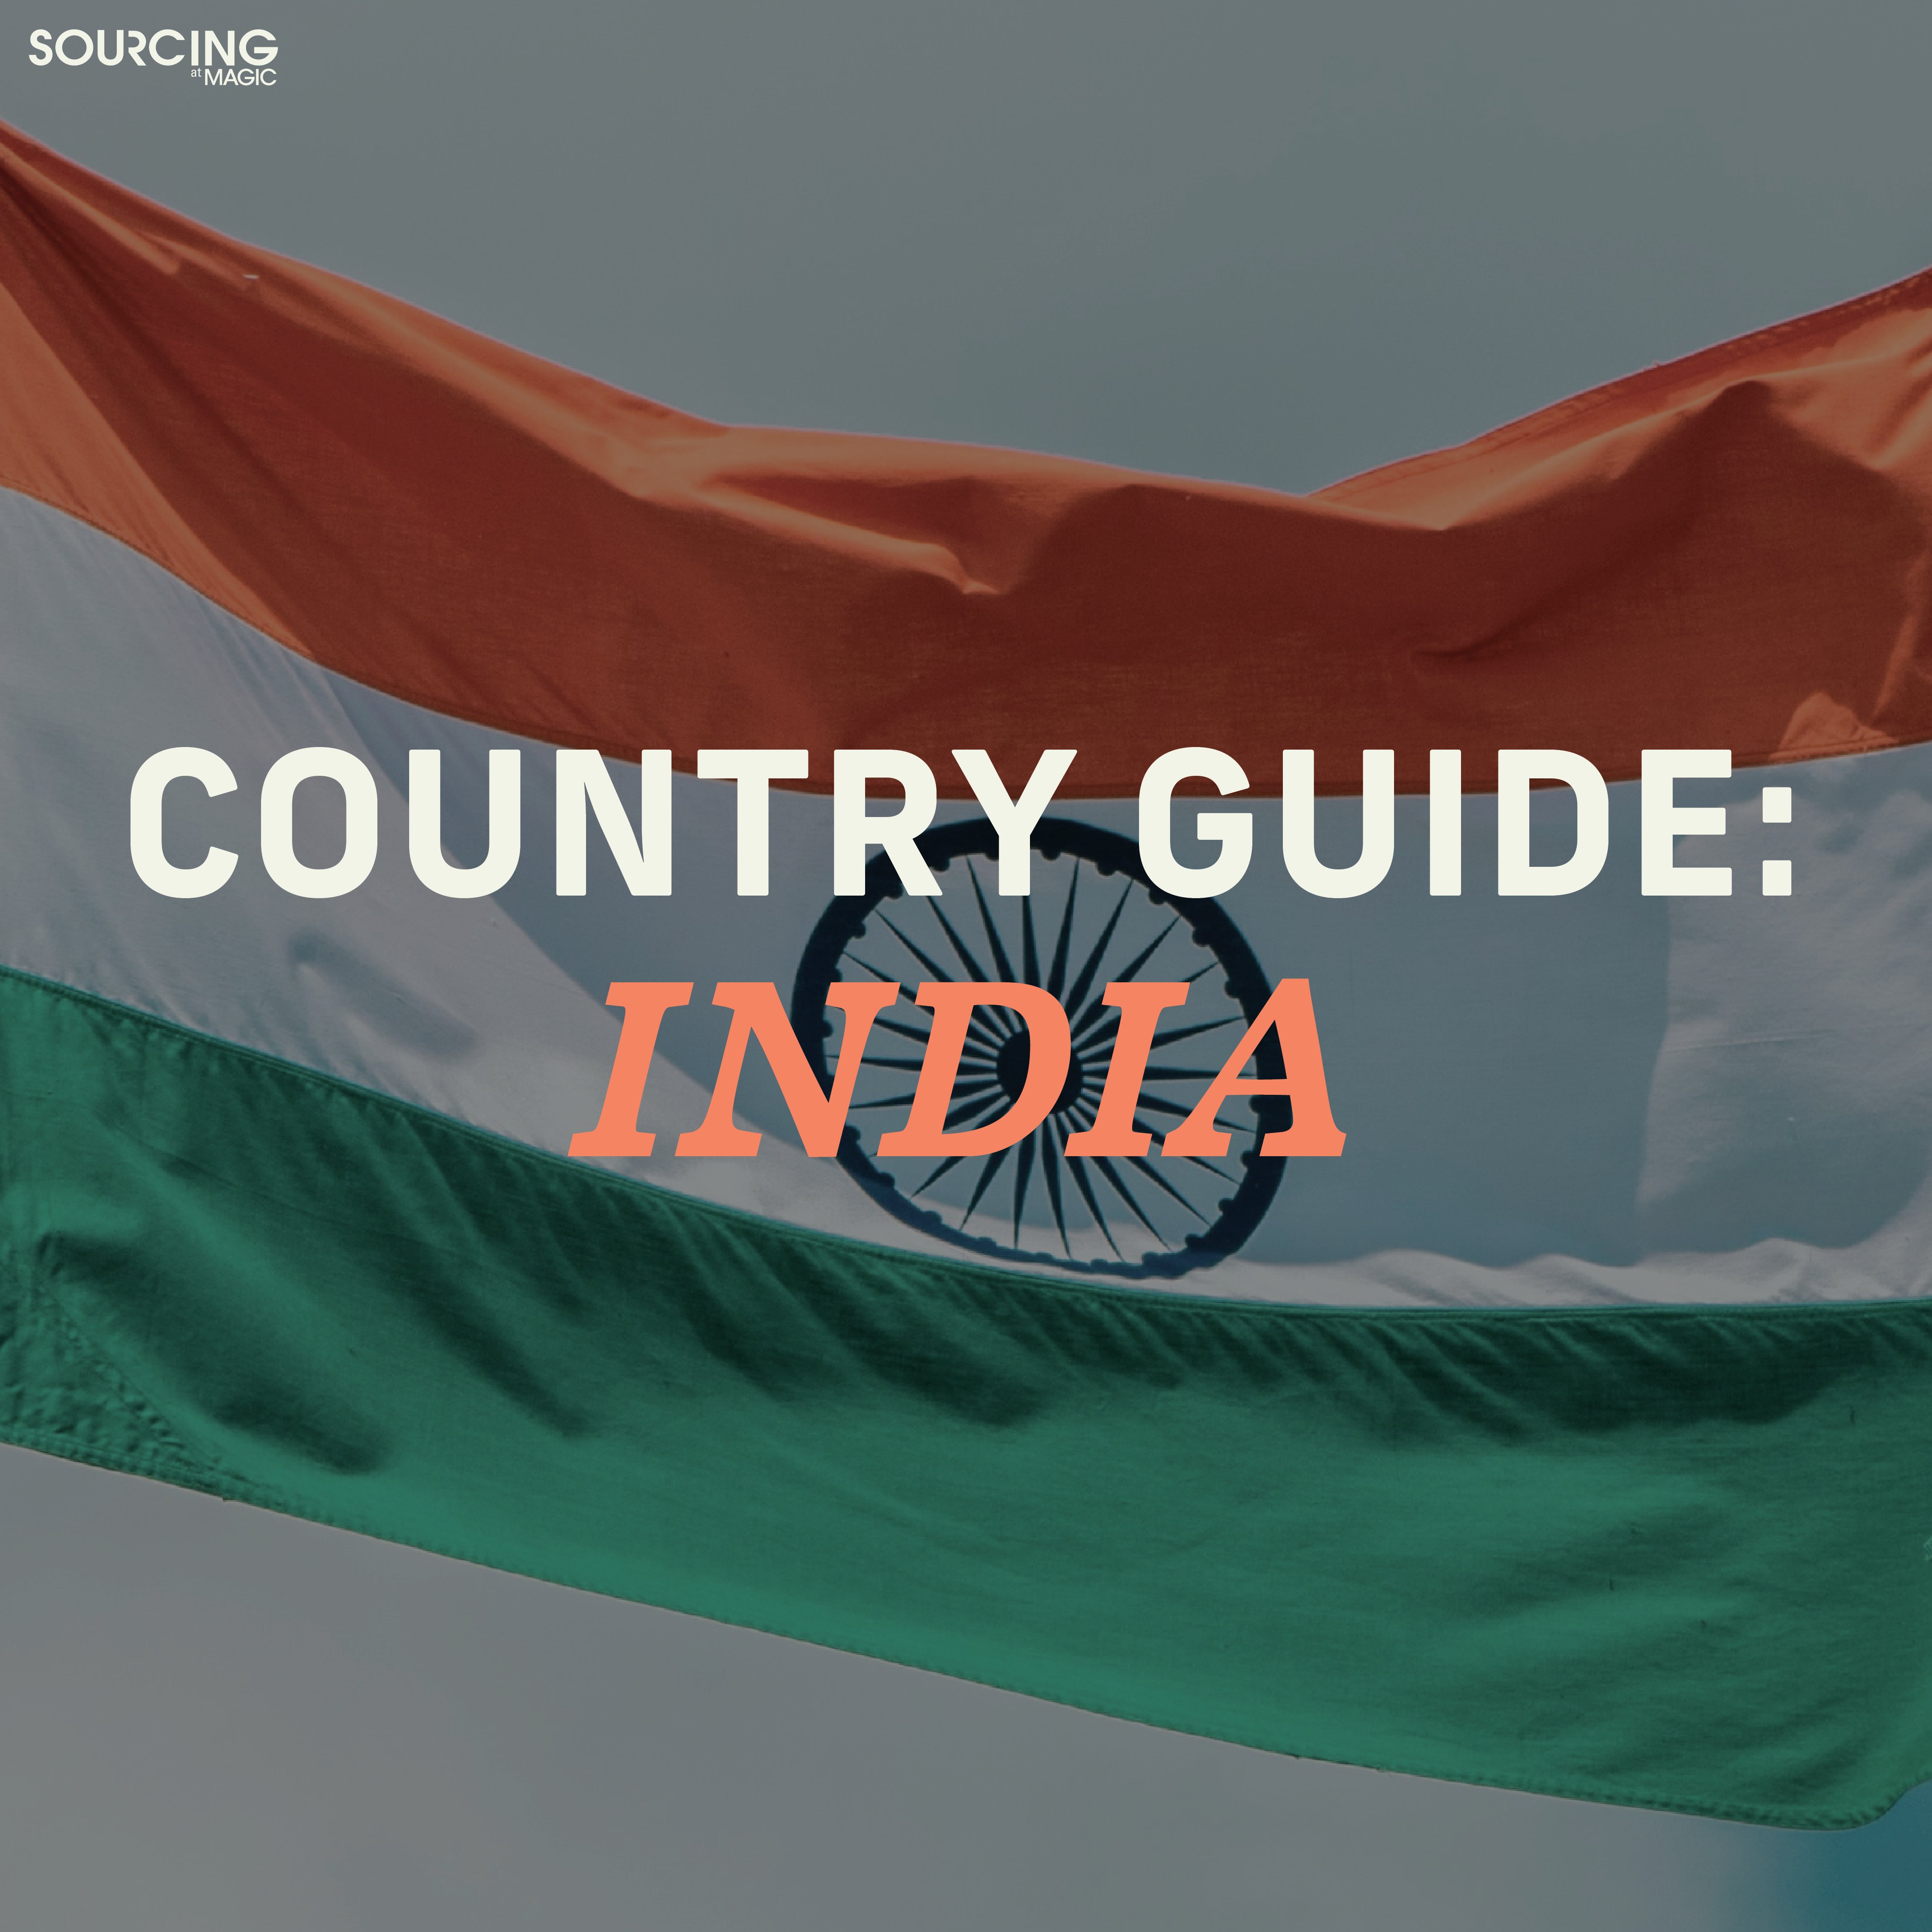 SOURCING at MAGIC: Country Guide - India